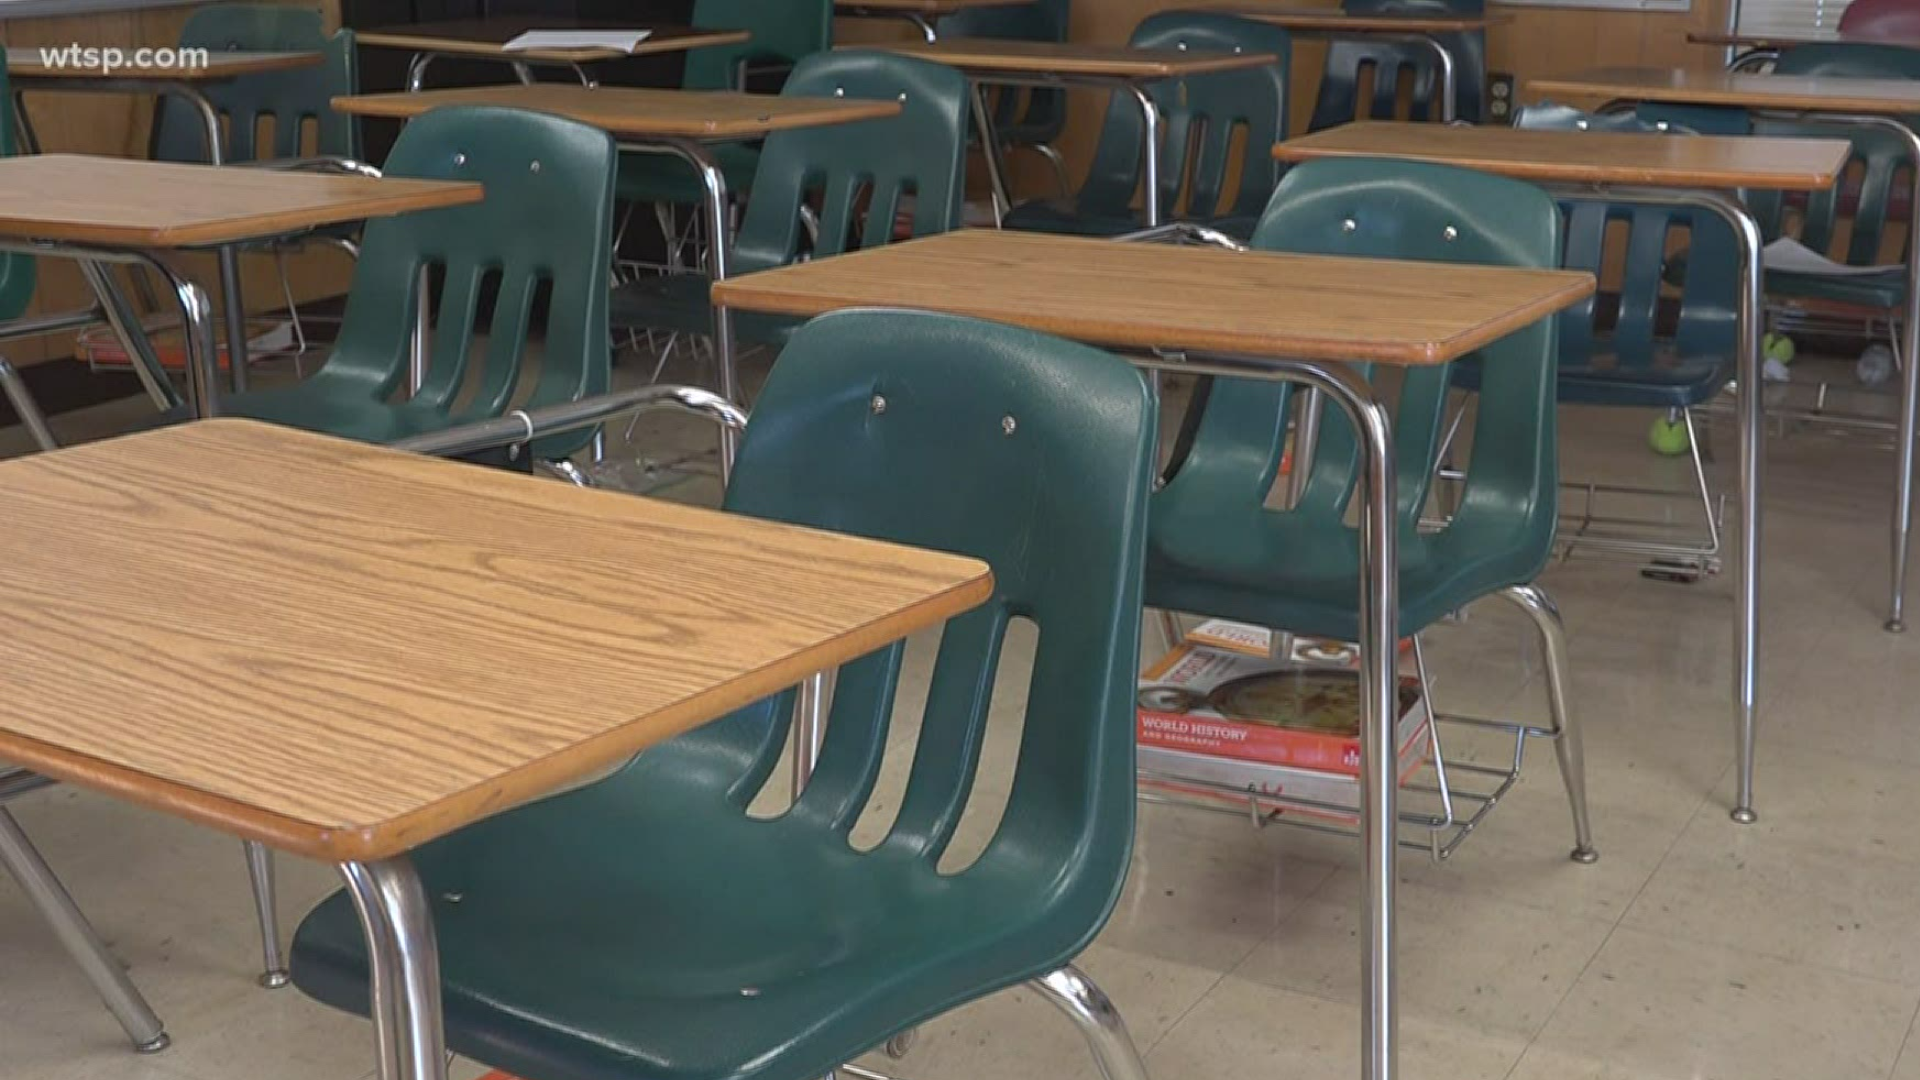 Gov. Ron DeSantis announced Saturday students won't be returning to classrooms this school year.